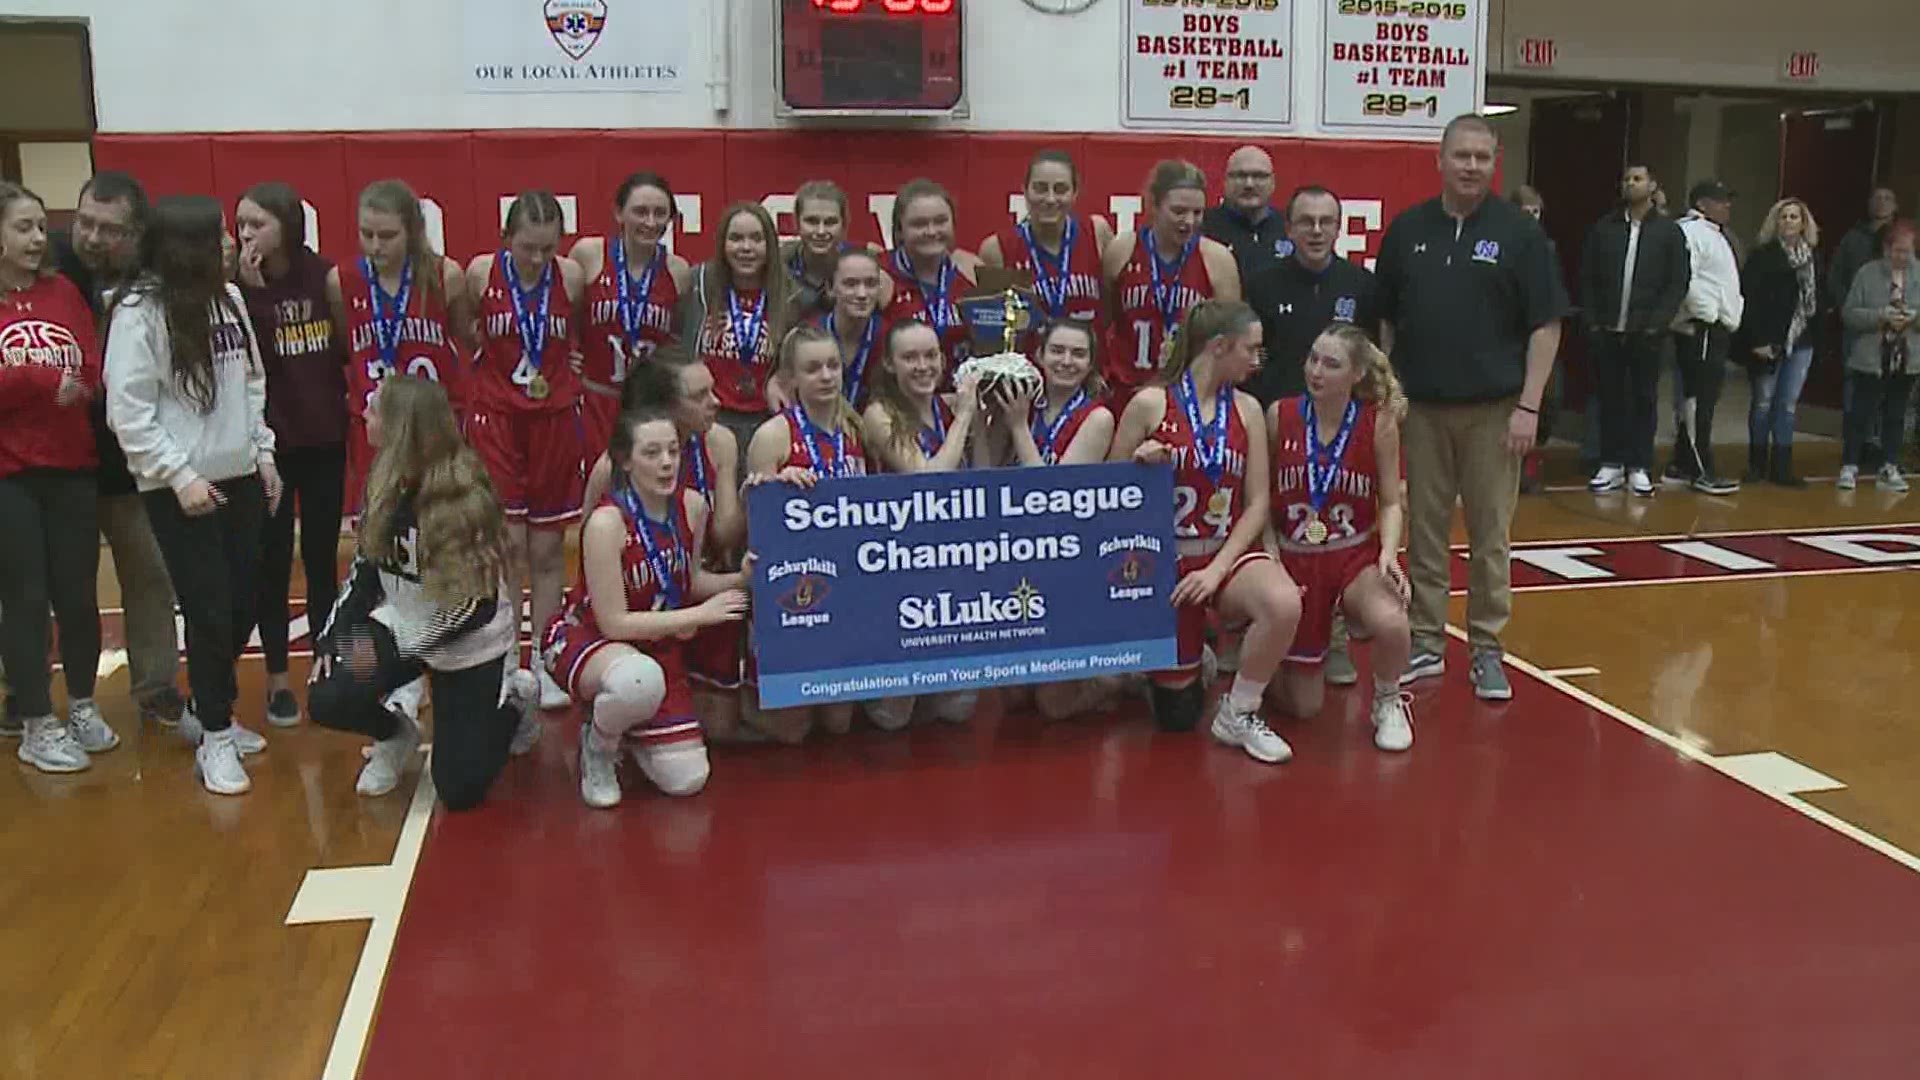 North Schuylkill rallies past Jim Thorpe to win the Schuylkill League girls basketball title, 49-46.